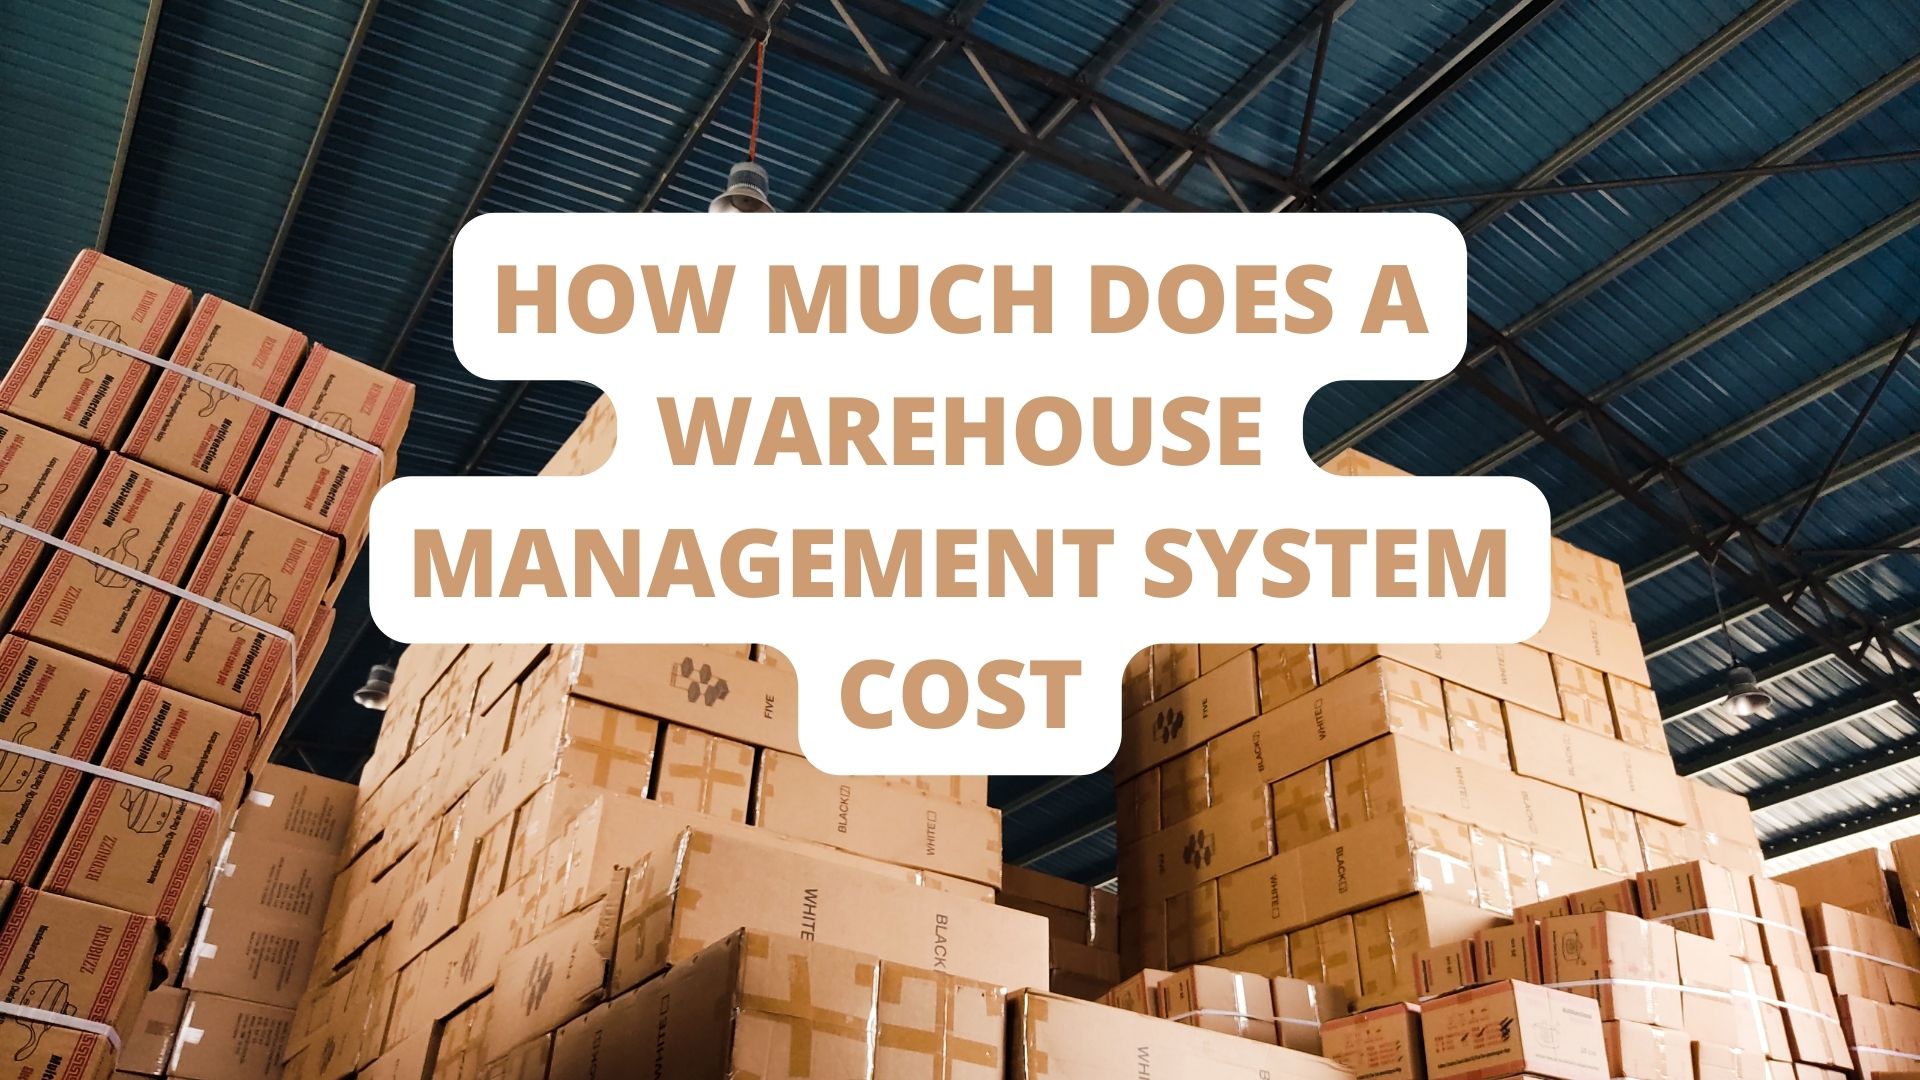 How Much Does a Warehouse Management System Cost